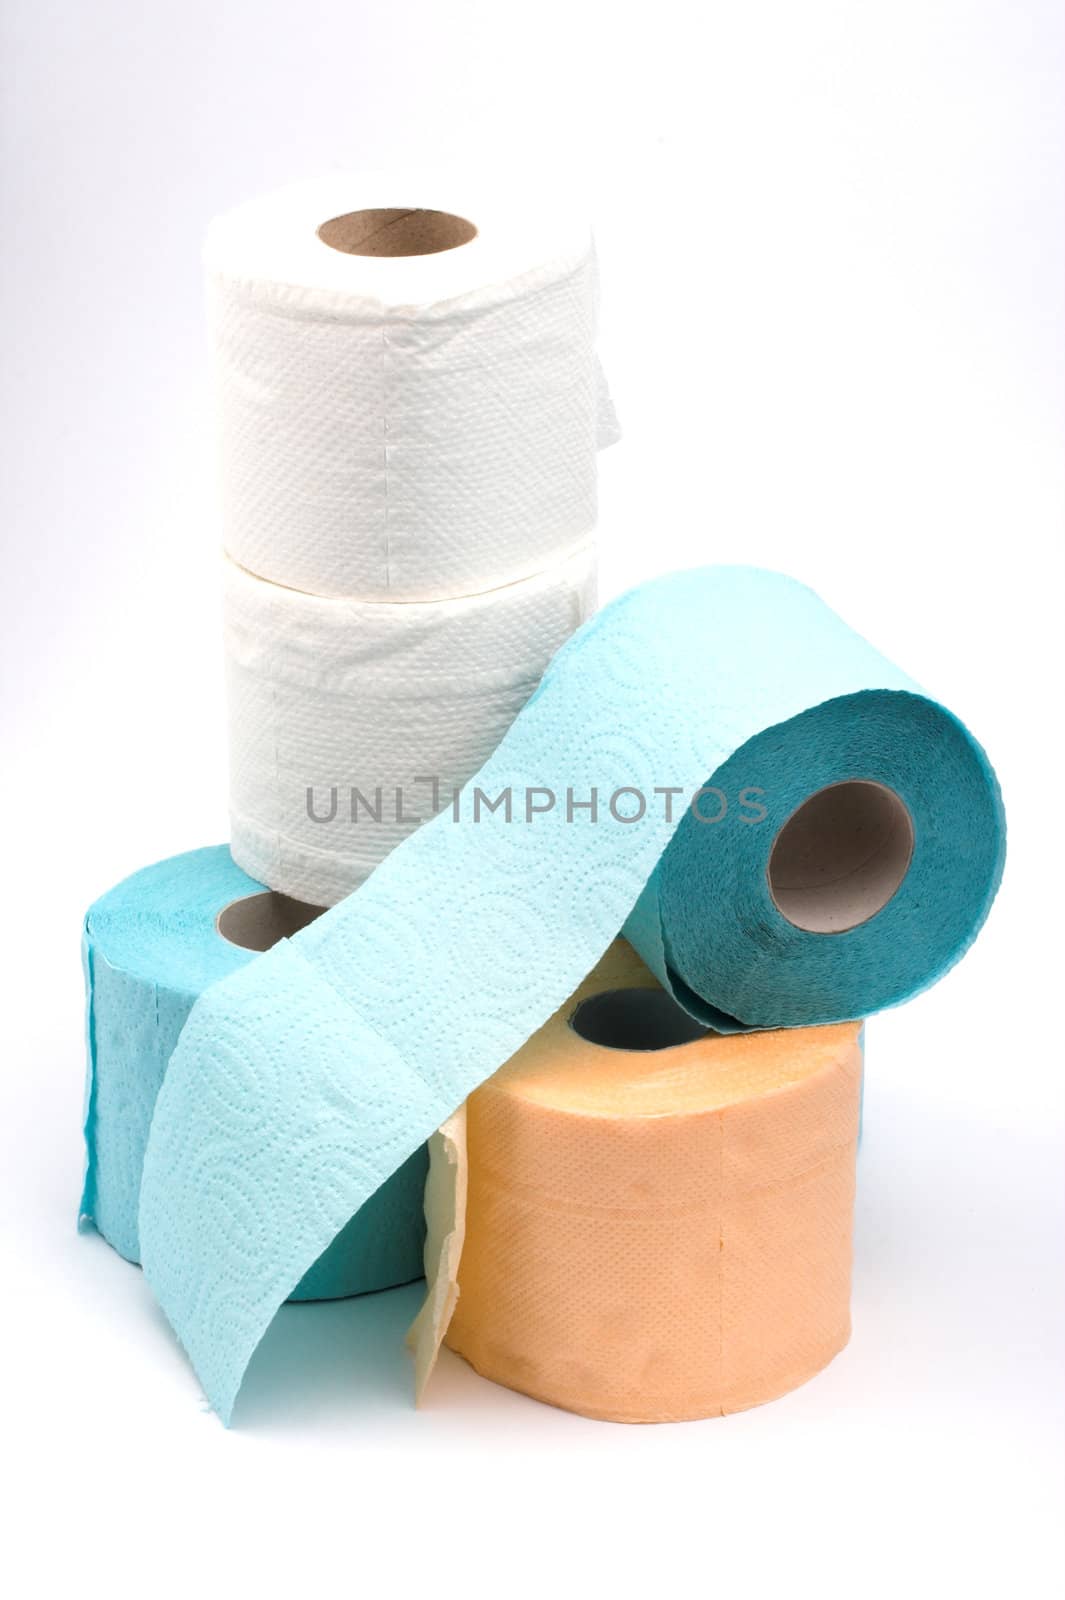 Stack of some rolls of color toilet paper